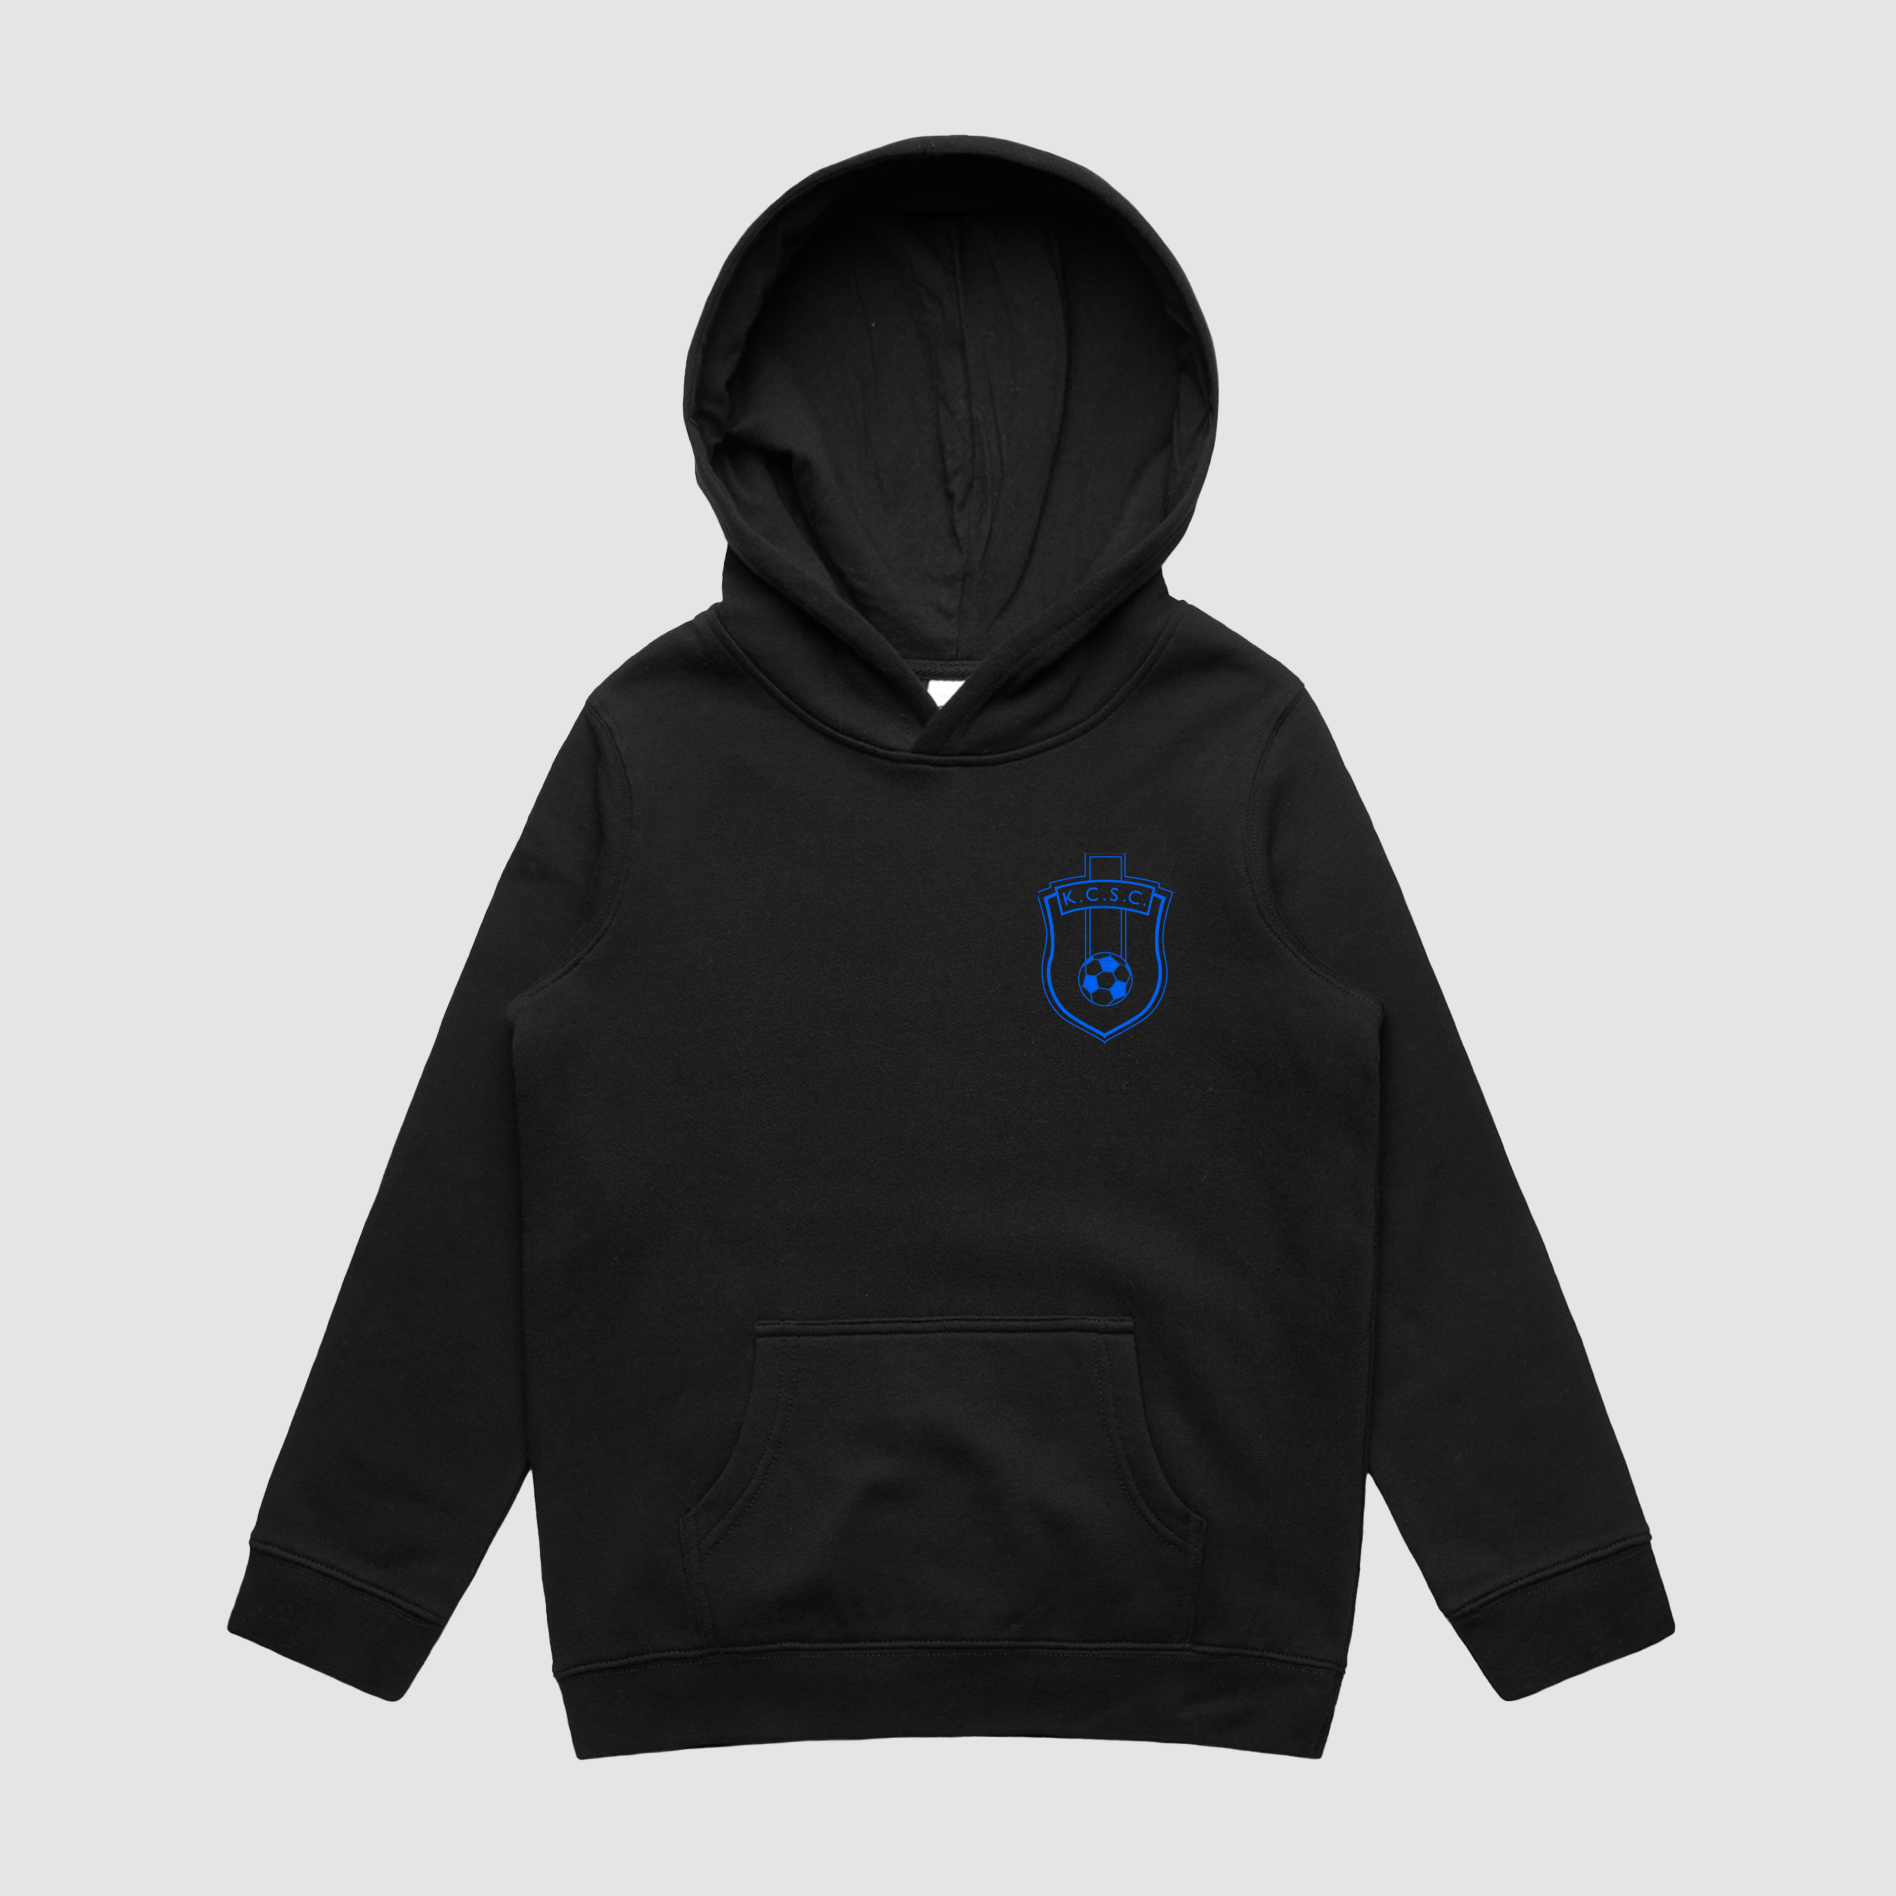 KCSC Youth Supply Hoodie